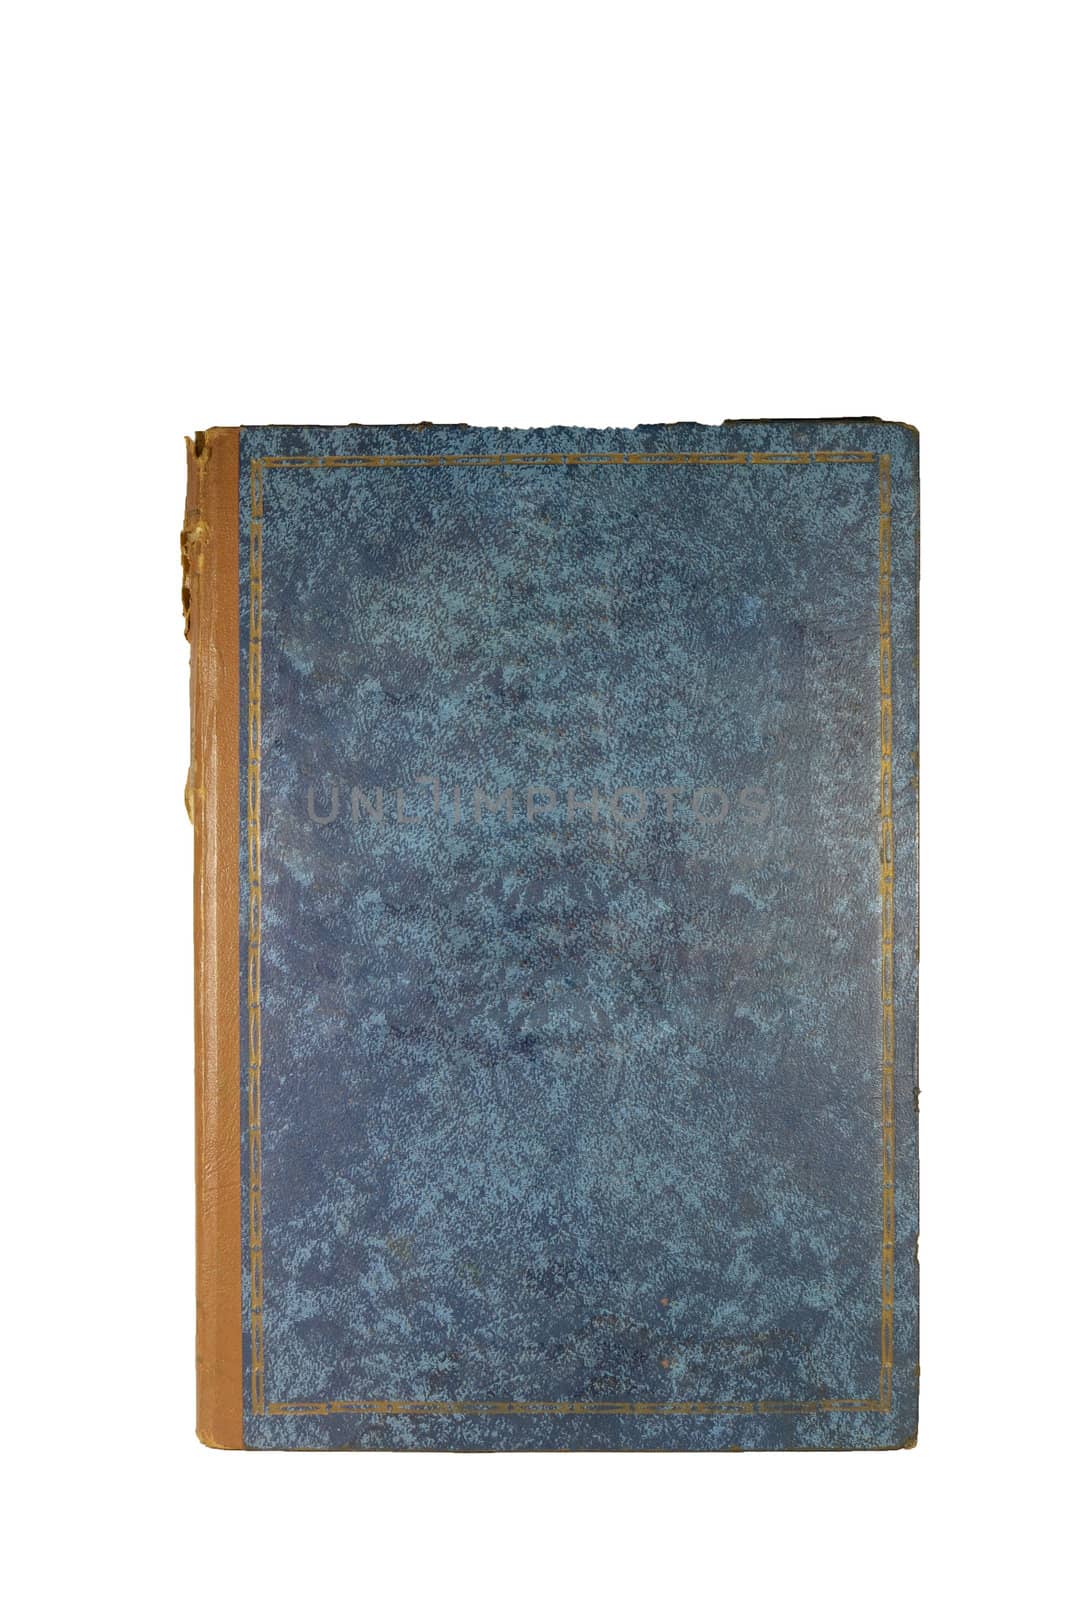 vintage textured book cover isolated in white background.